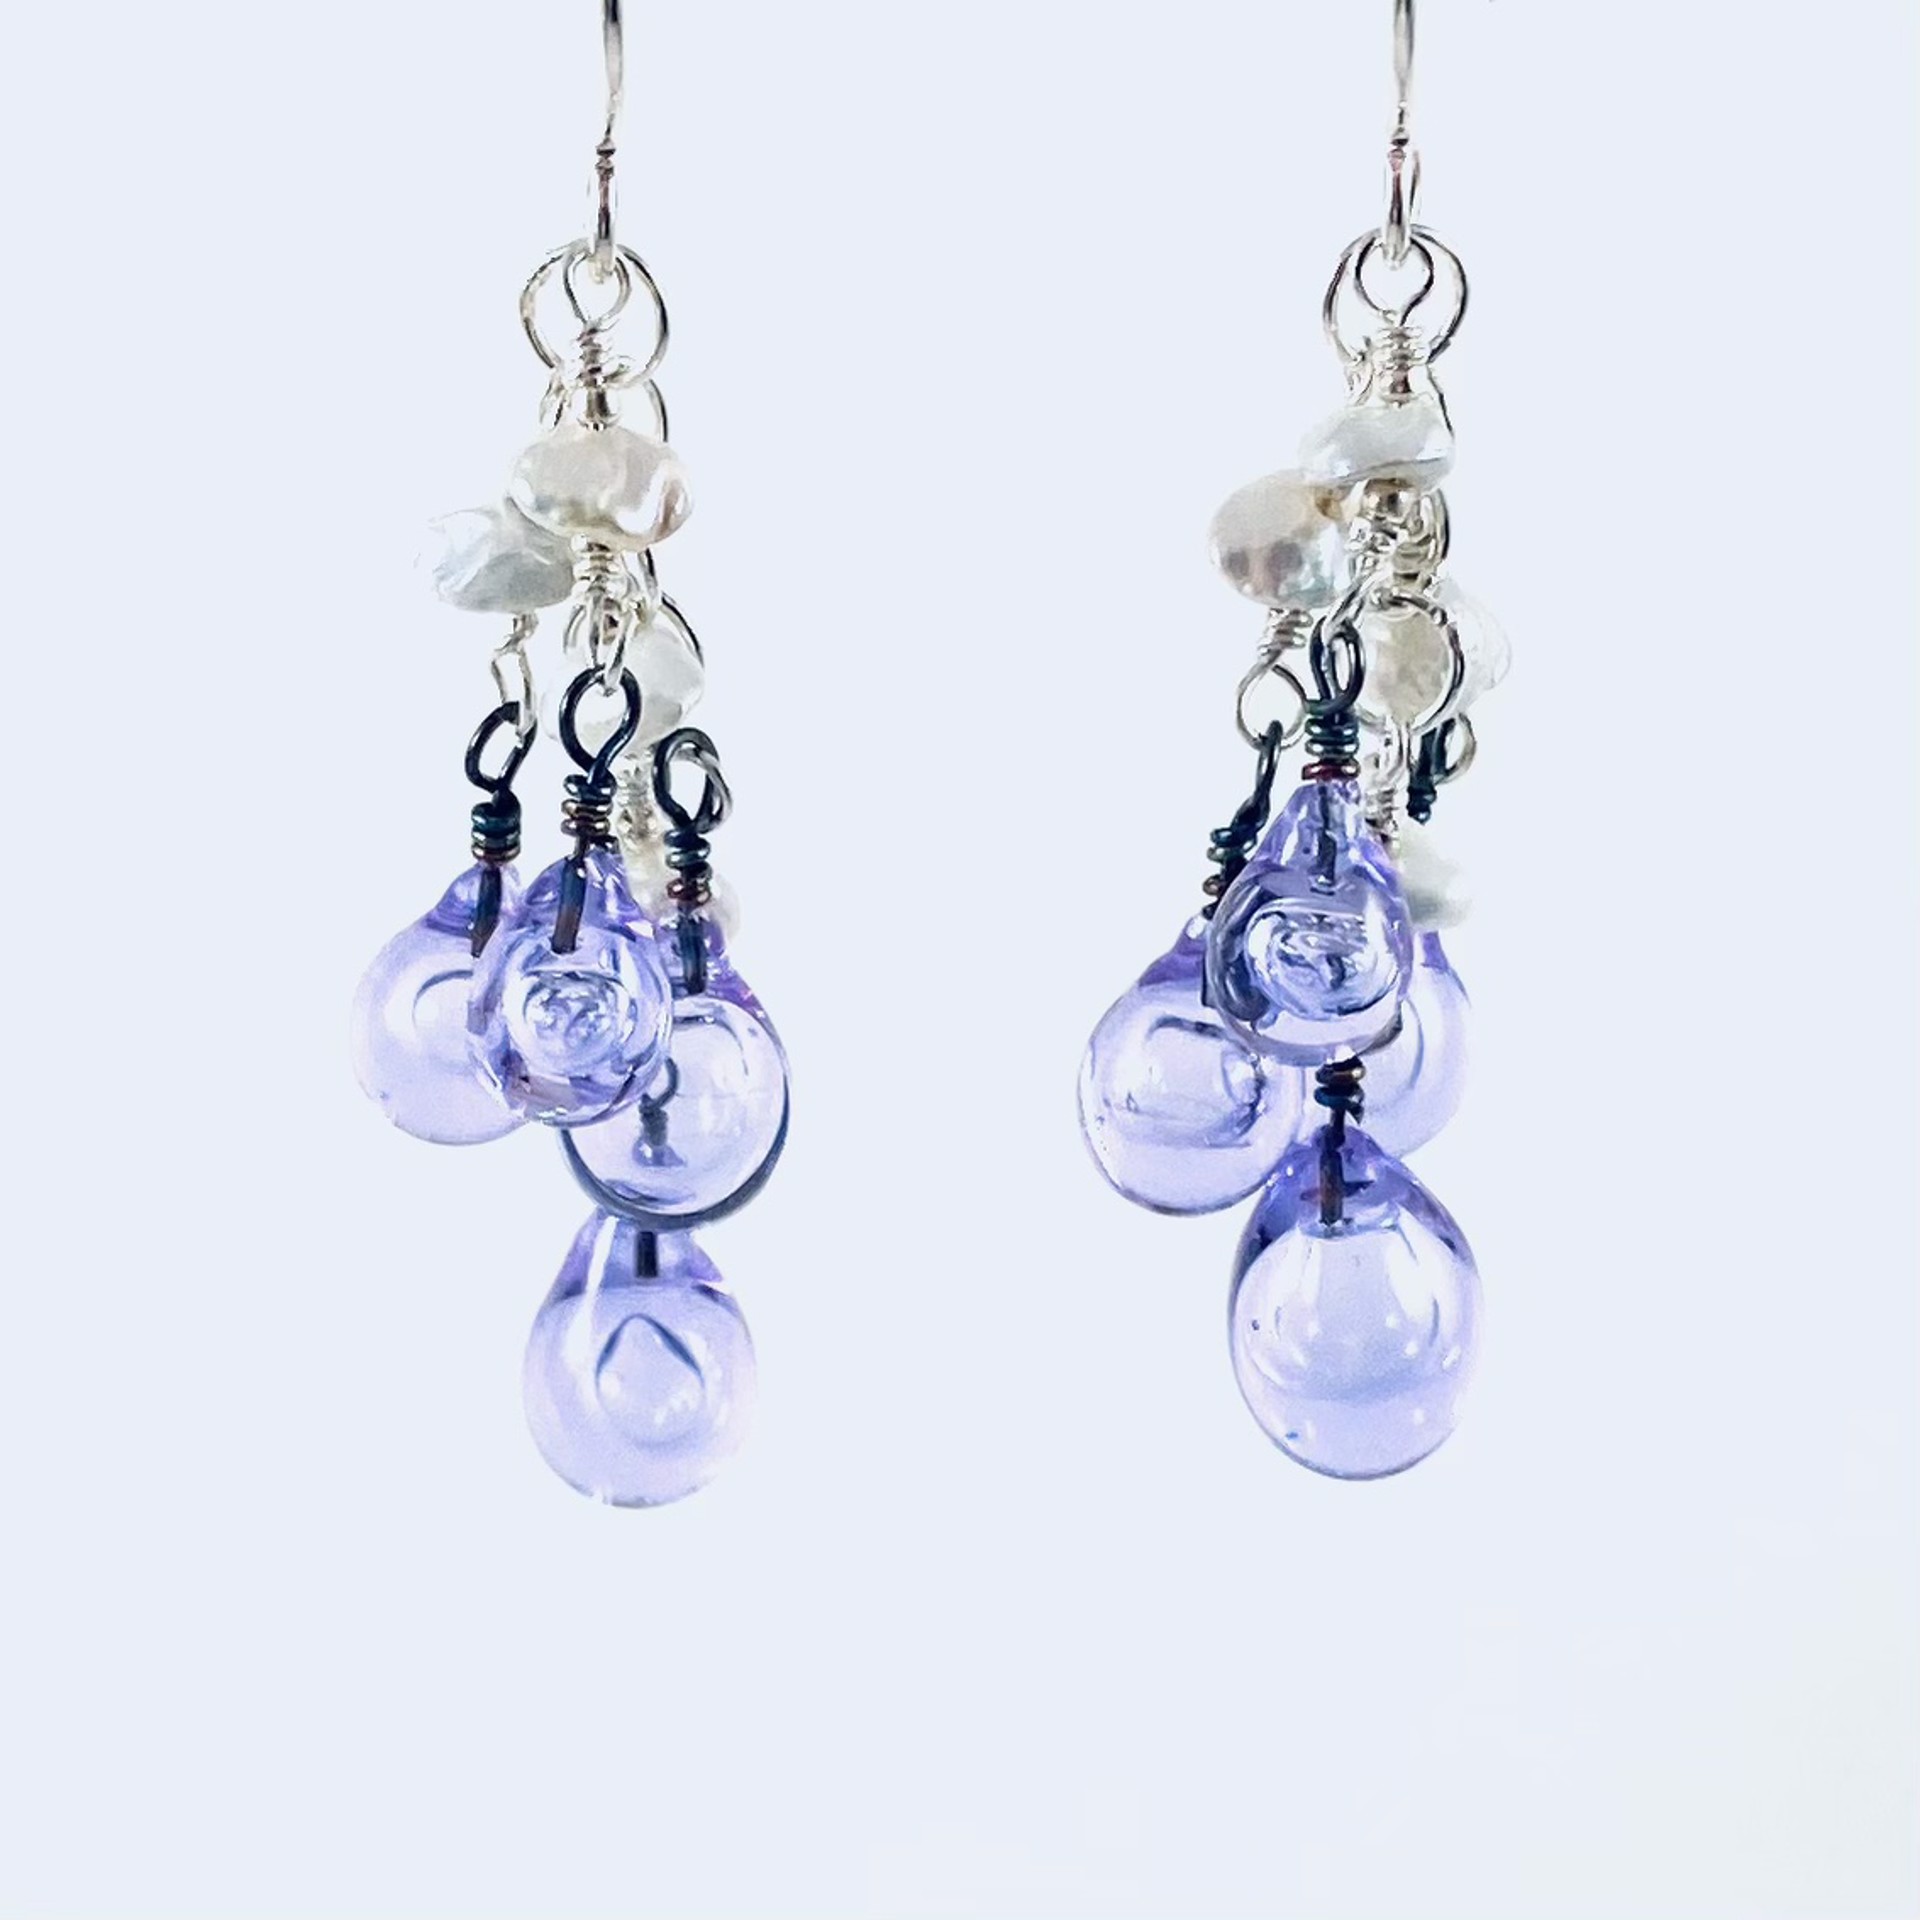 Pale Blue/Lavender (glass changes color) Hollow Drop Bead Cluster with Pearl Earrings by Linda Sacra